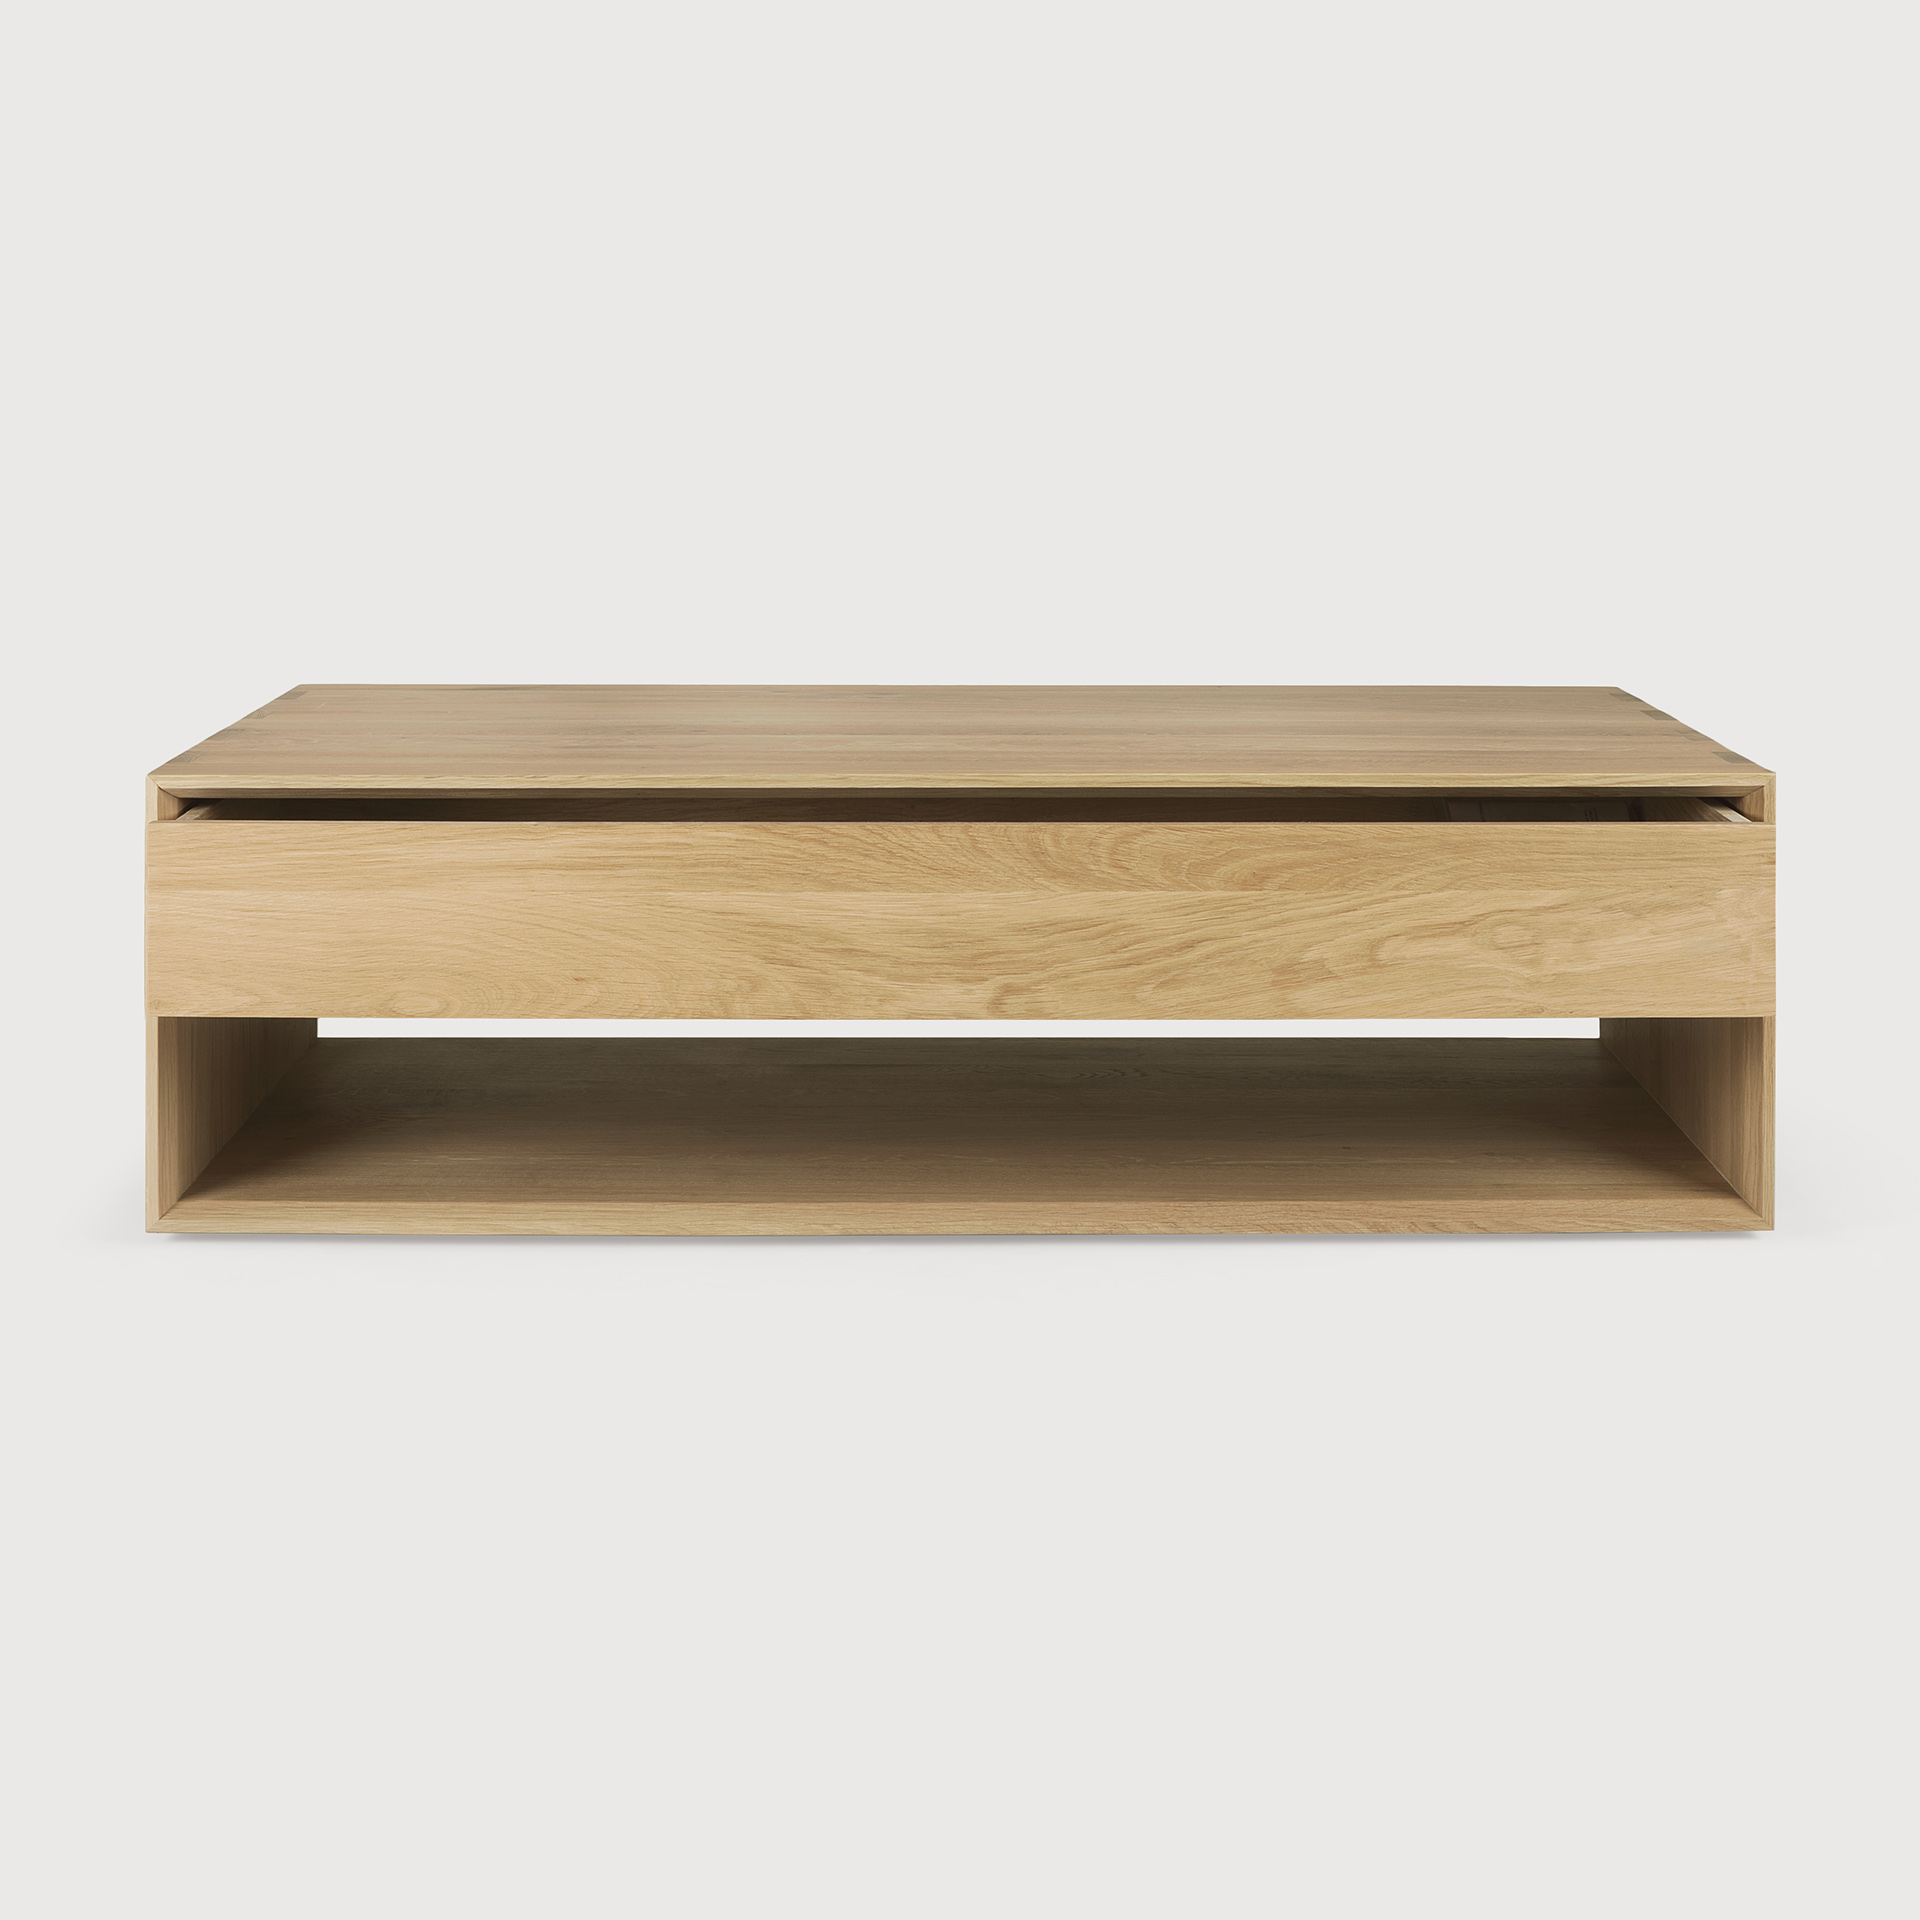 [51445*] Nordic coffee table - 1 drawer 